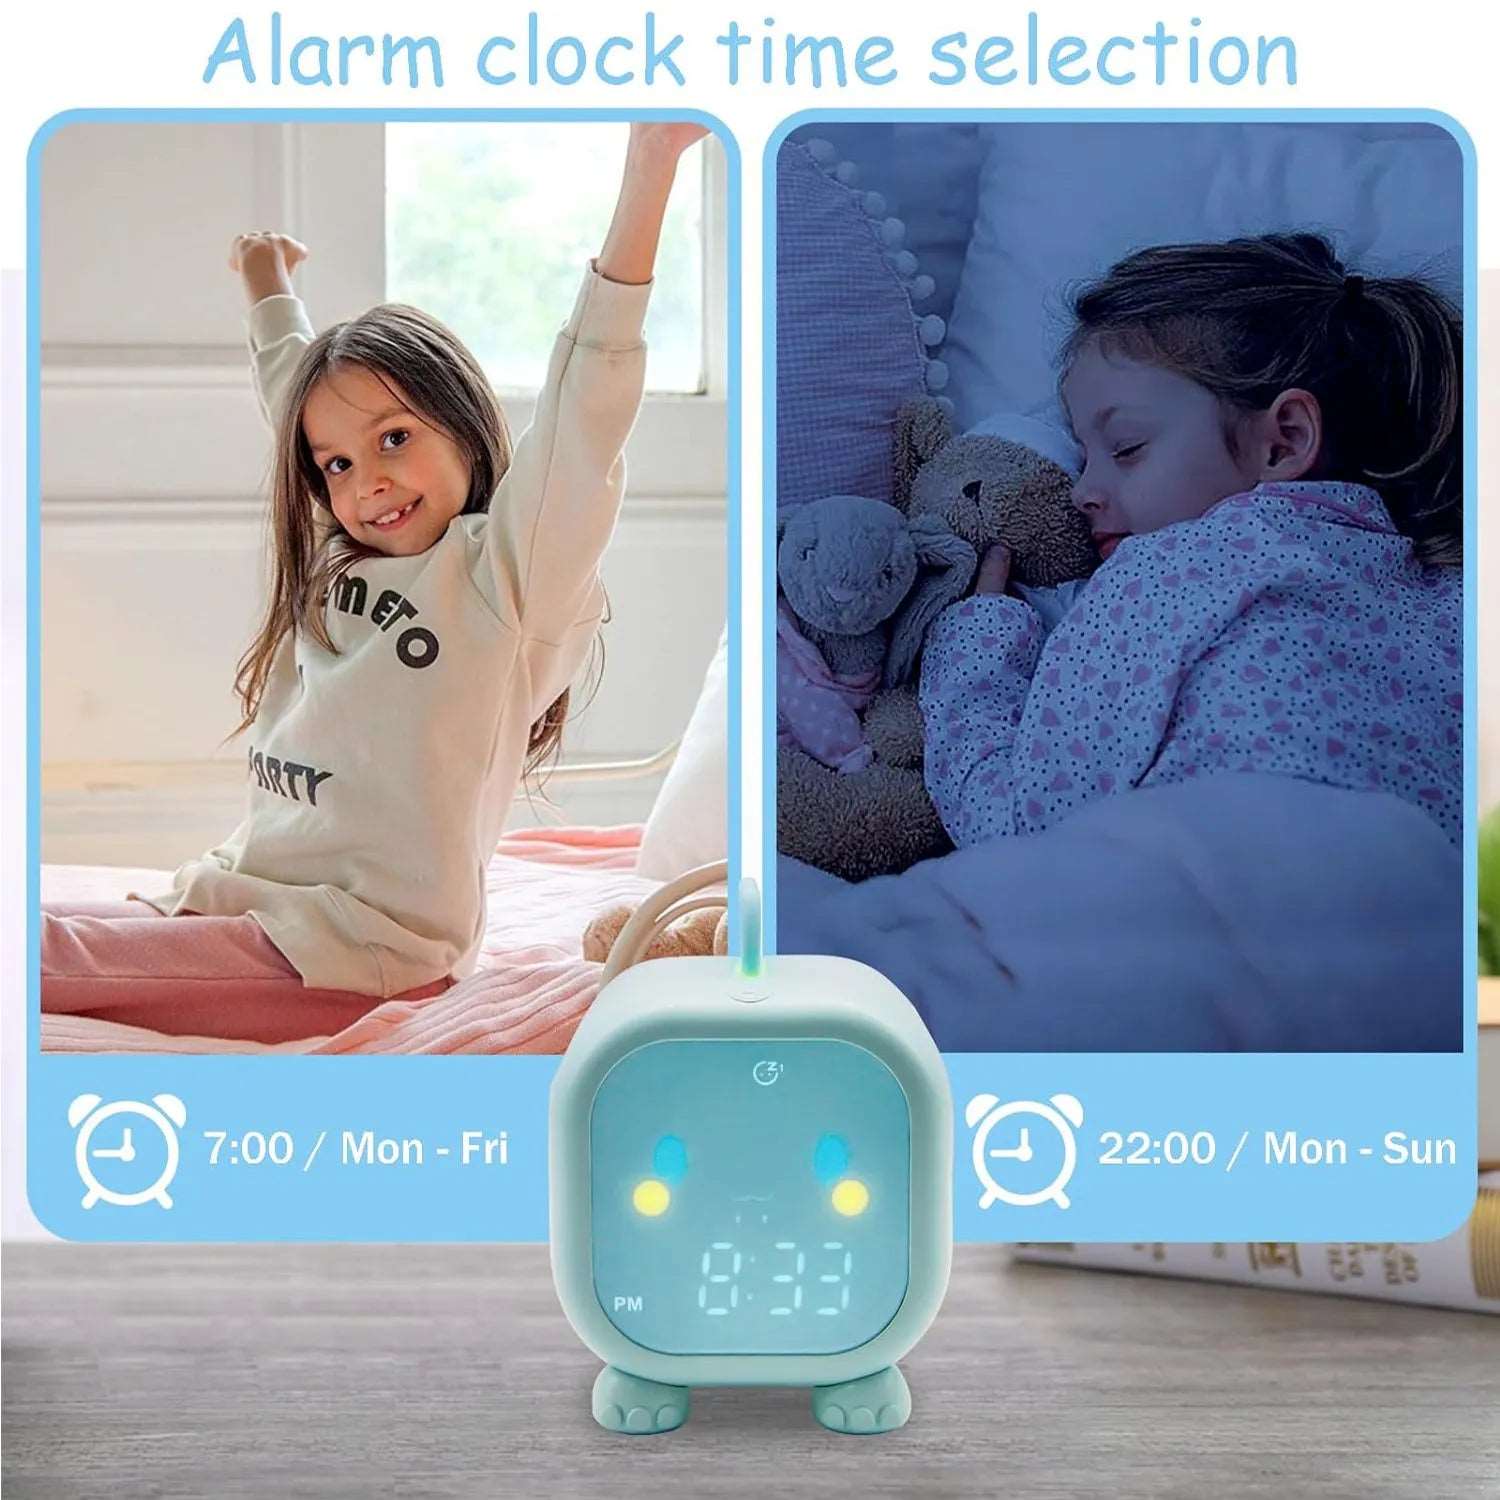 Muvit Cute Funny Digital Dinosaur Kids Alarm ClockDigital Alarm Clock For Kids
The Muvit Funny Dinosaur Kids digital alarm clock is an electronic timekeeping device that typically features a digital display and is eMuvitMuvitMuvit Cute Funny Digital Dinosaur Kids Alarm Clock